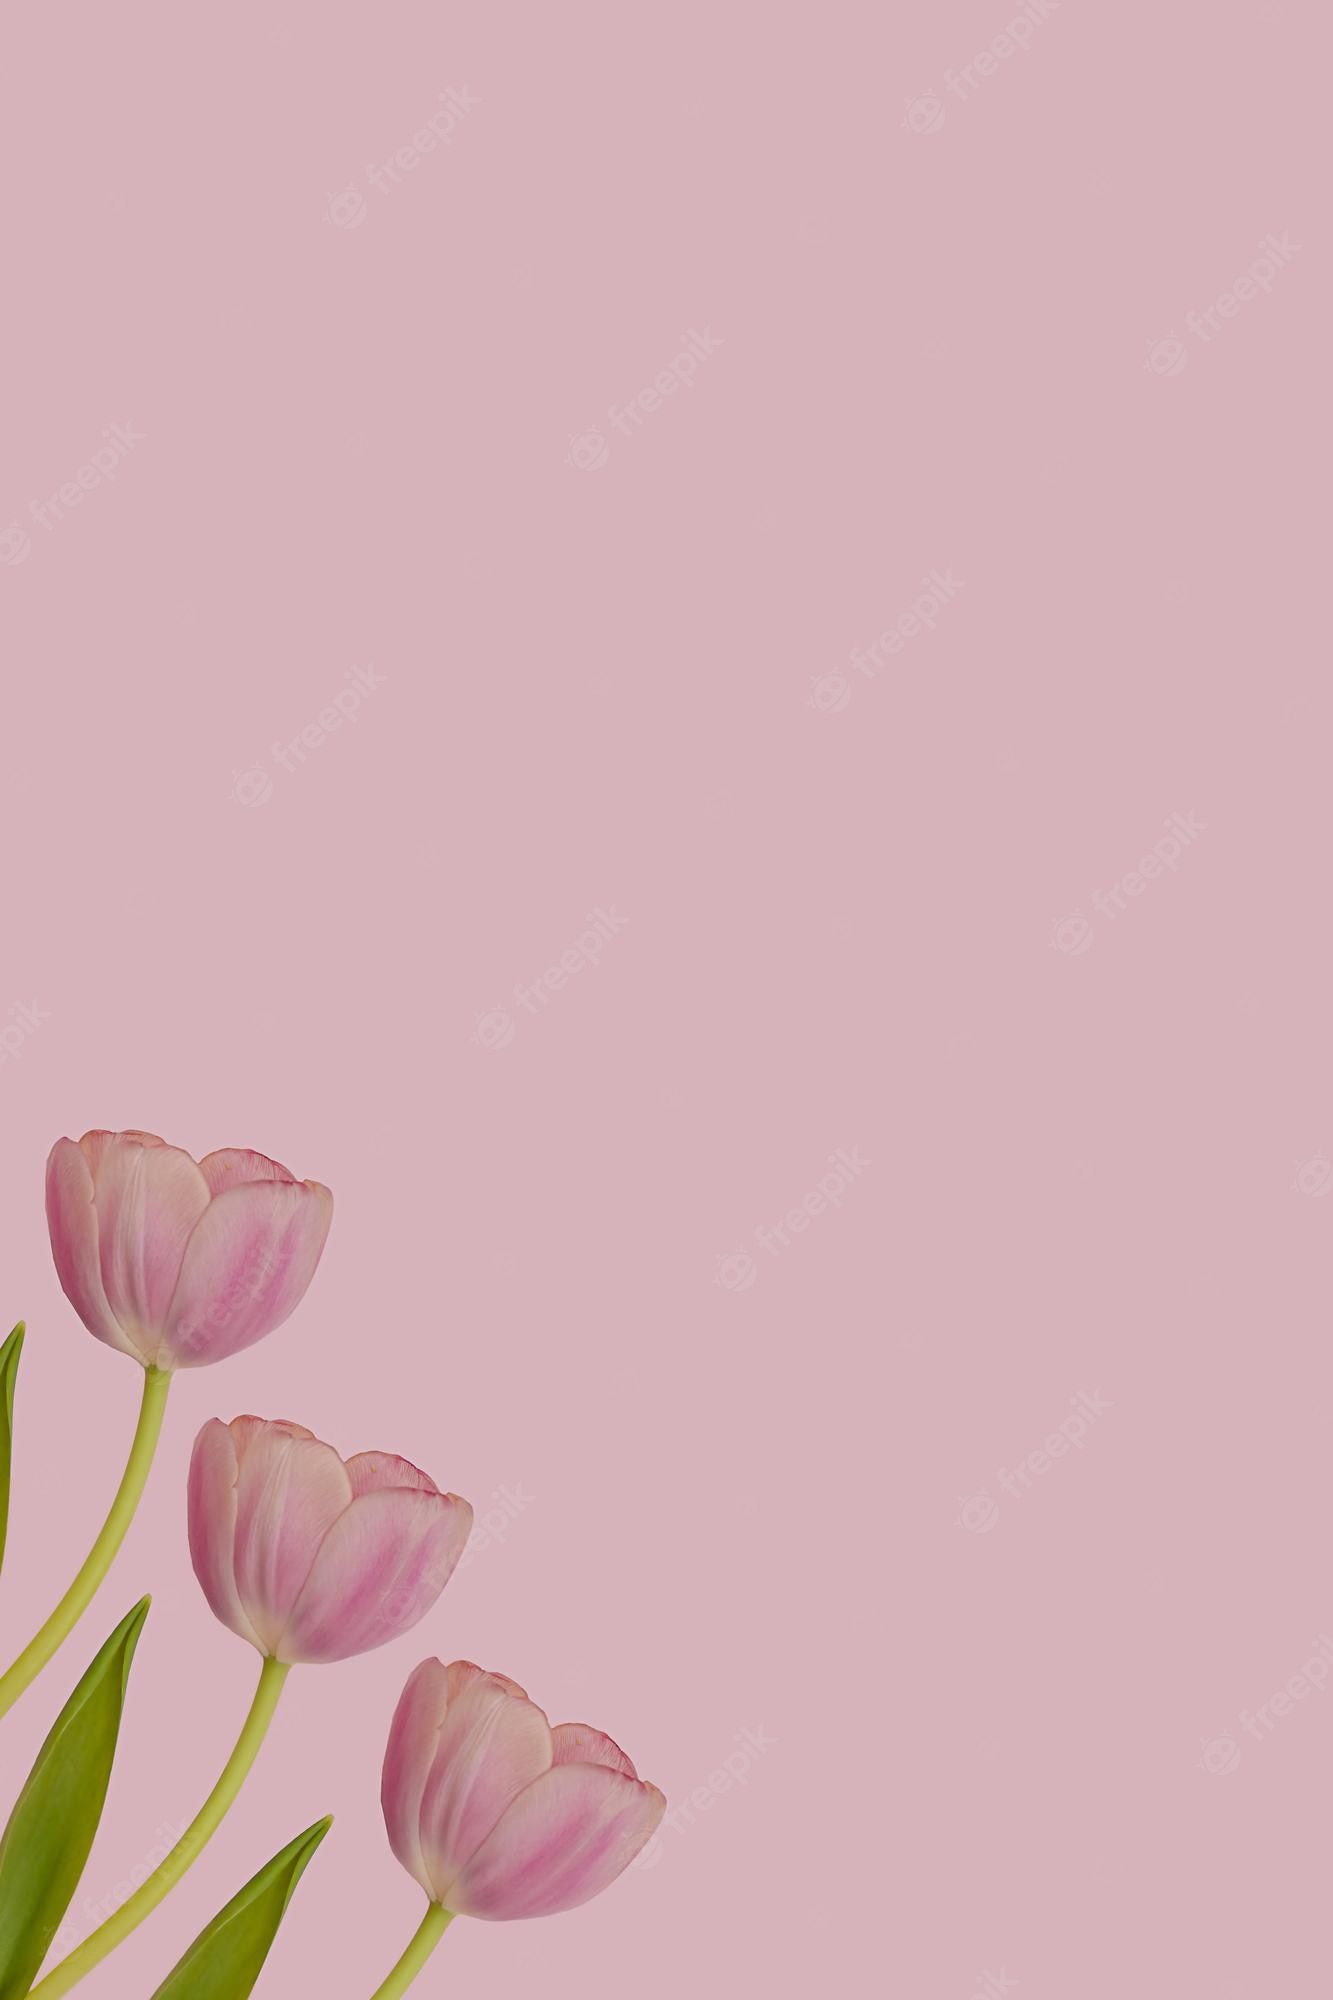 A pink background with three tulips - Tulip